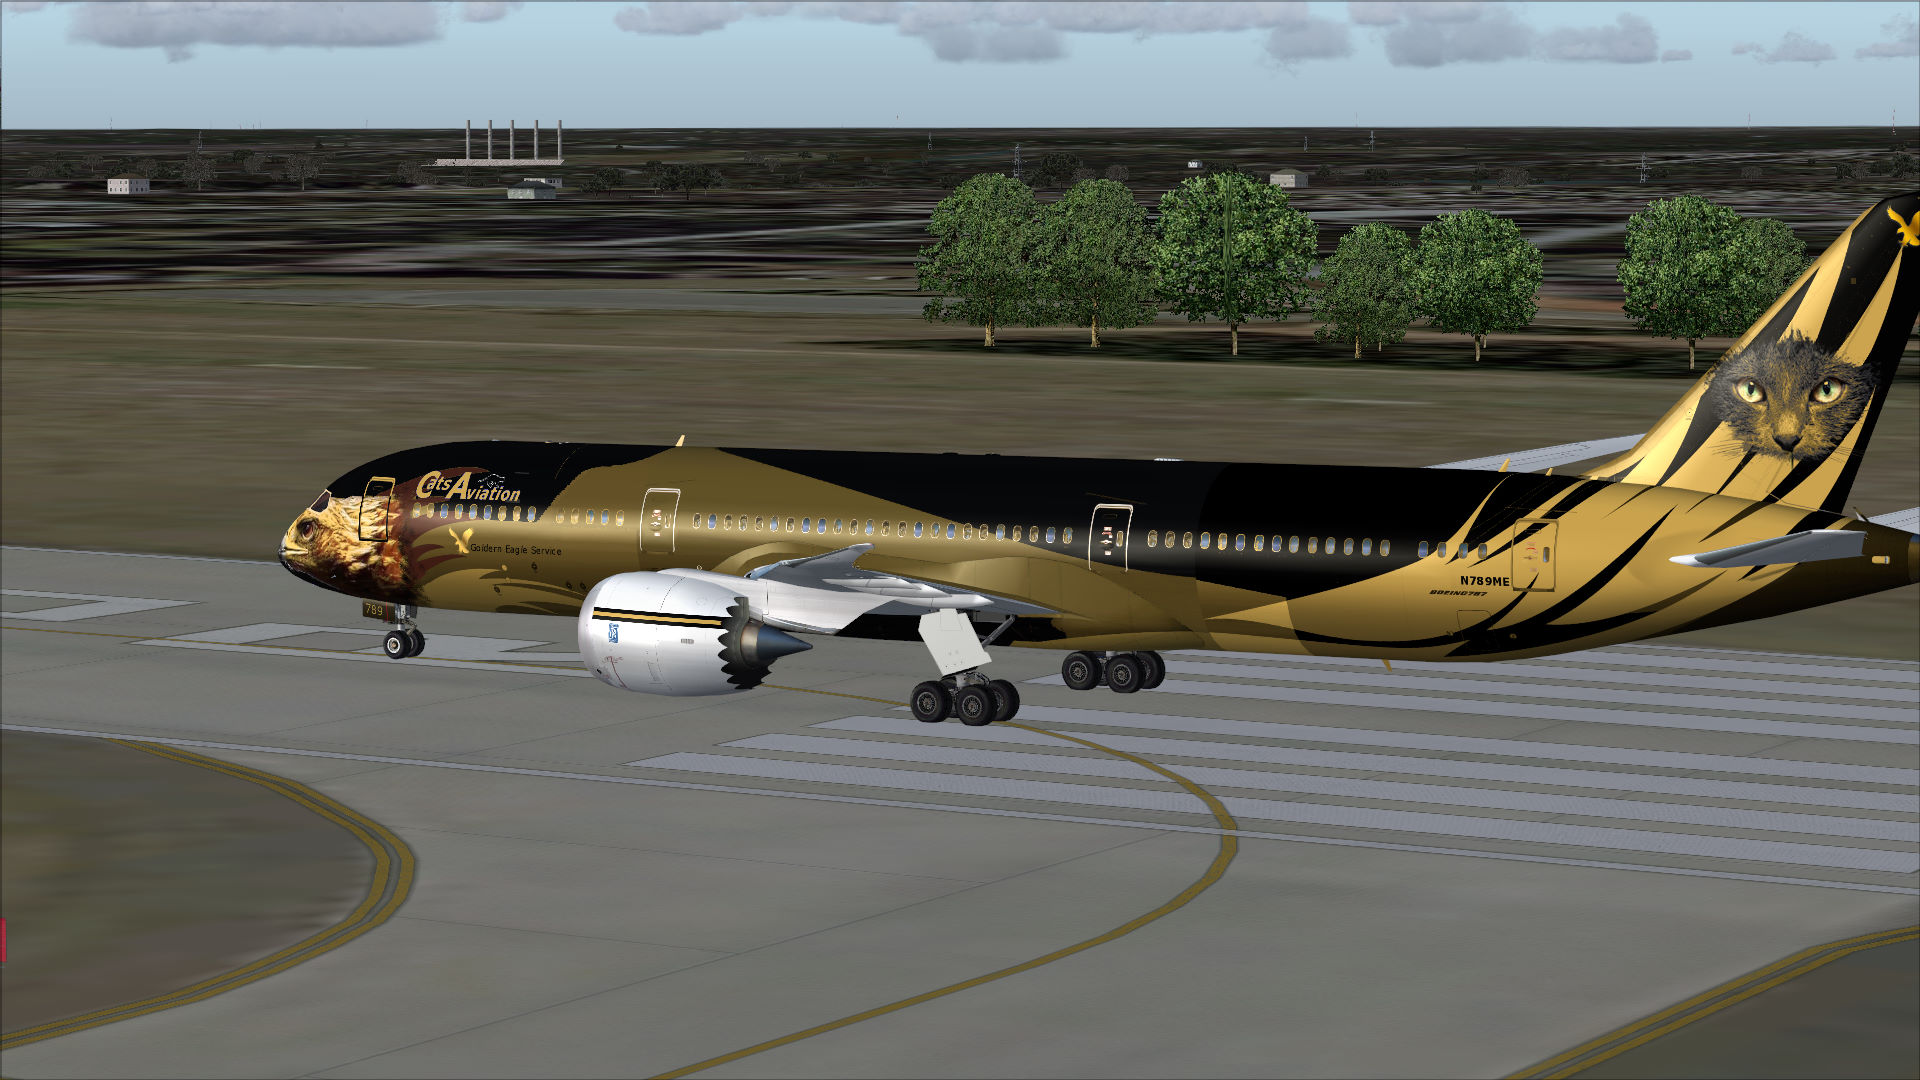 New Paint for the leased 787-900